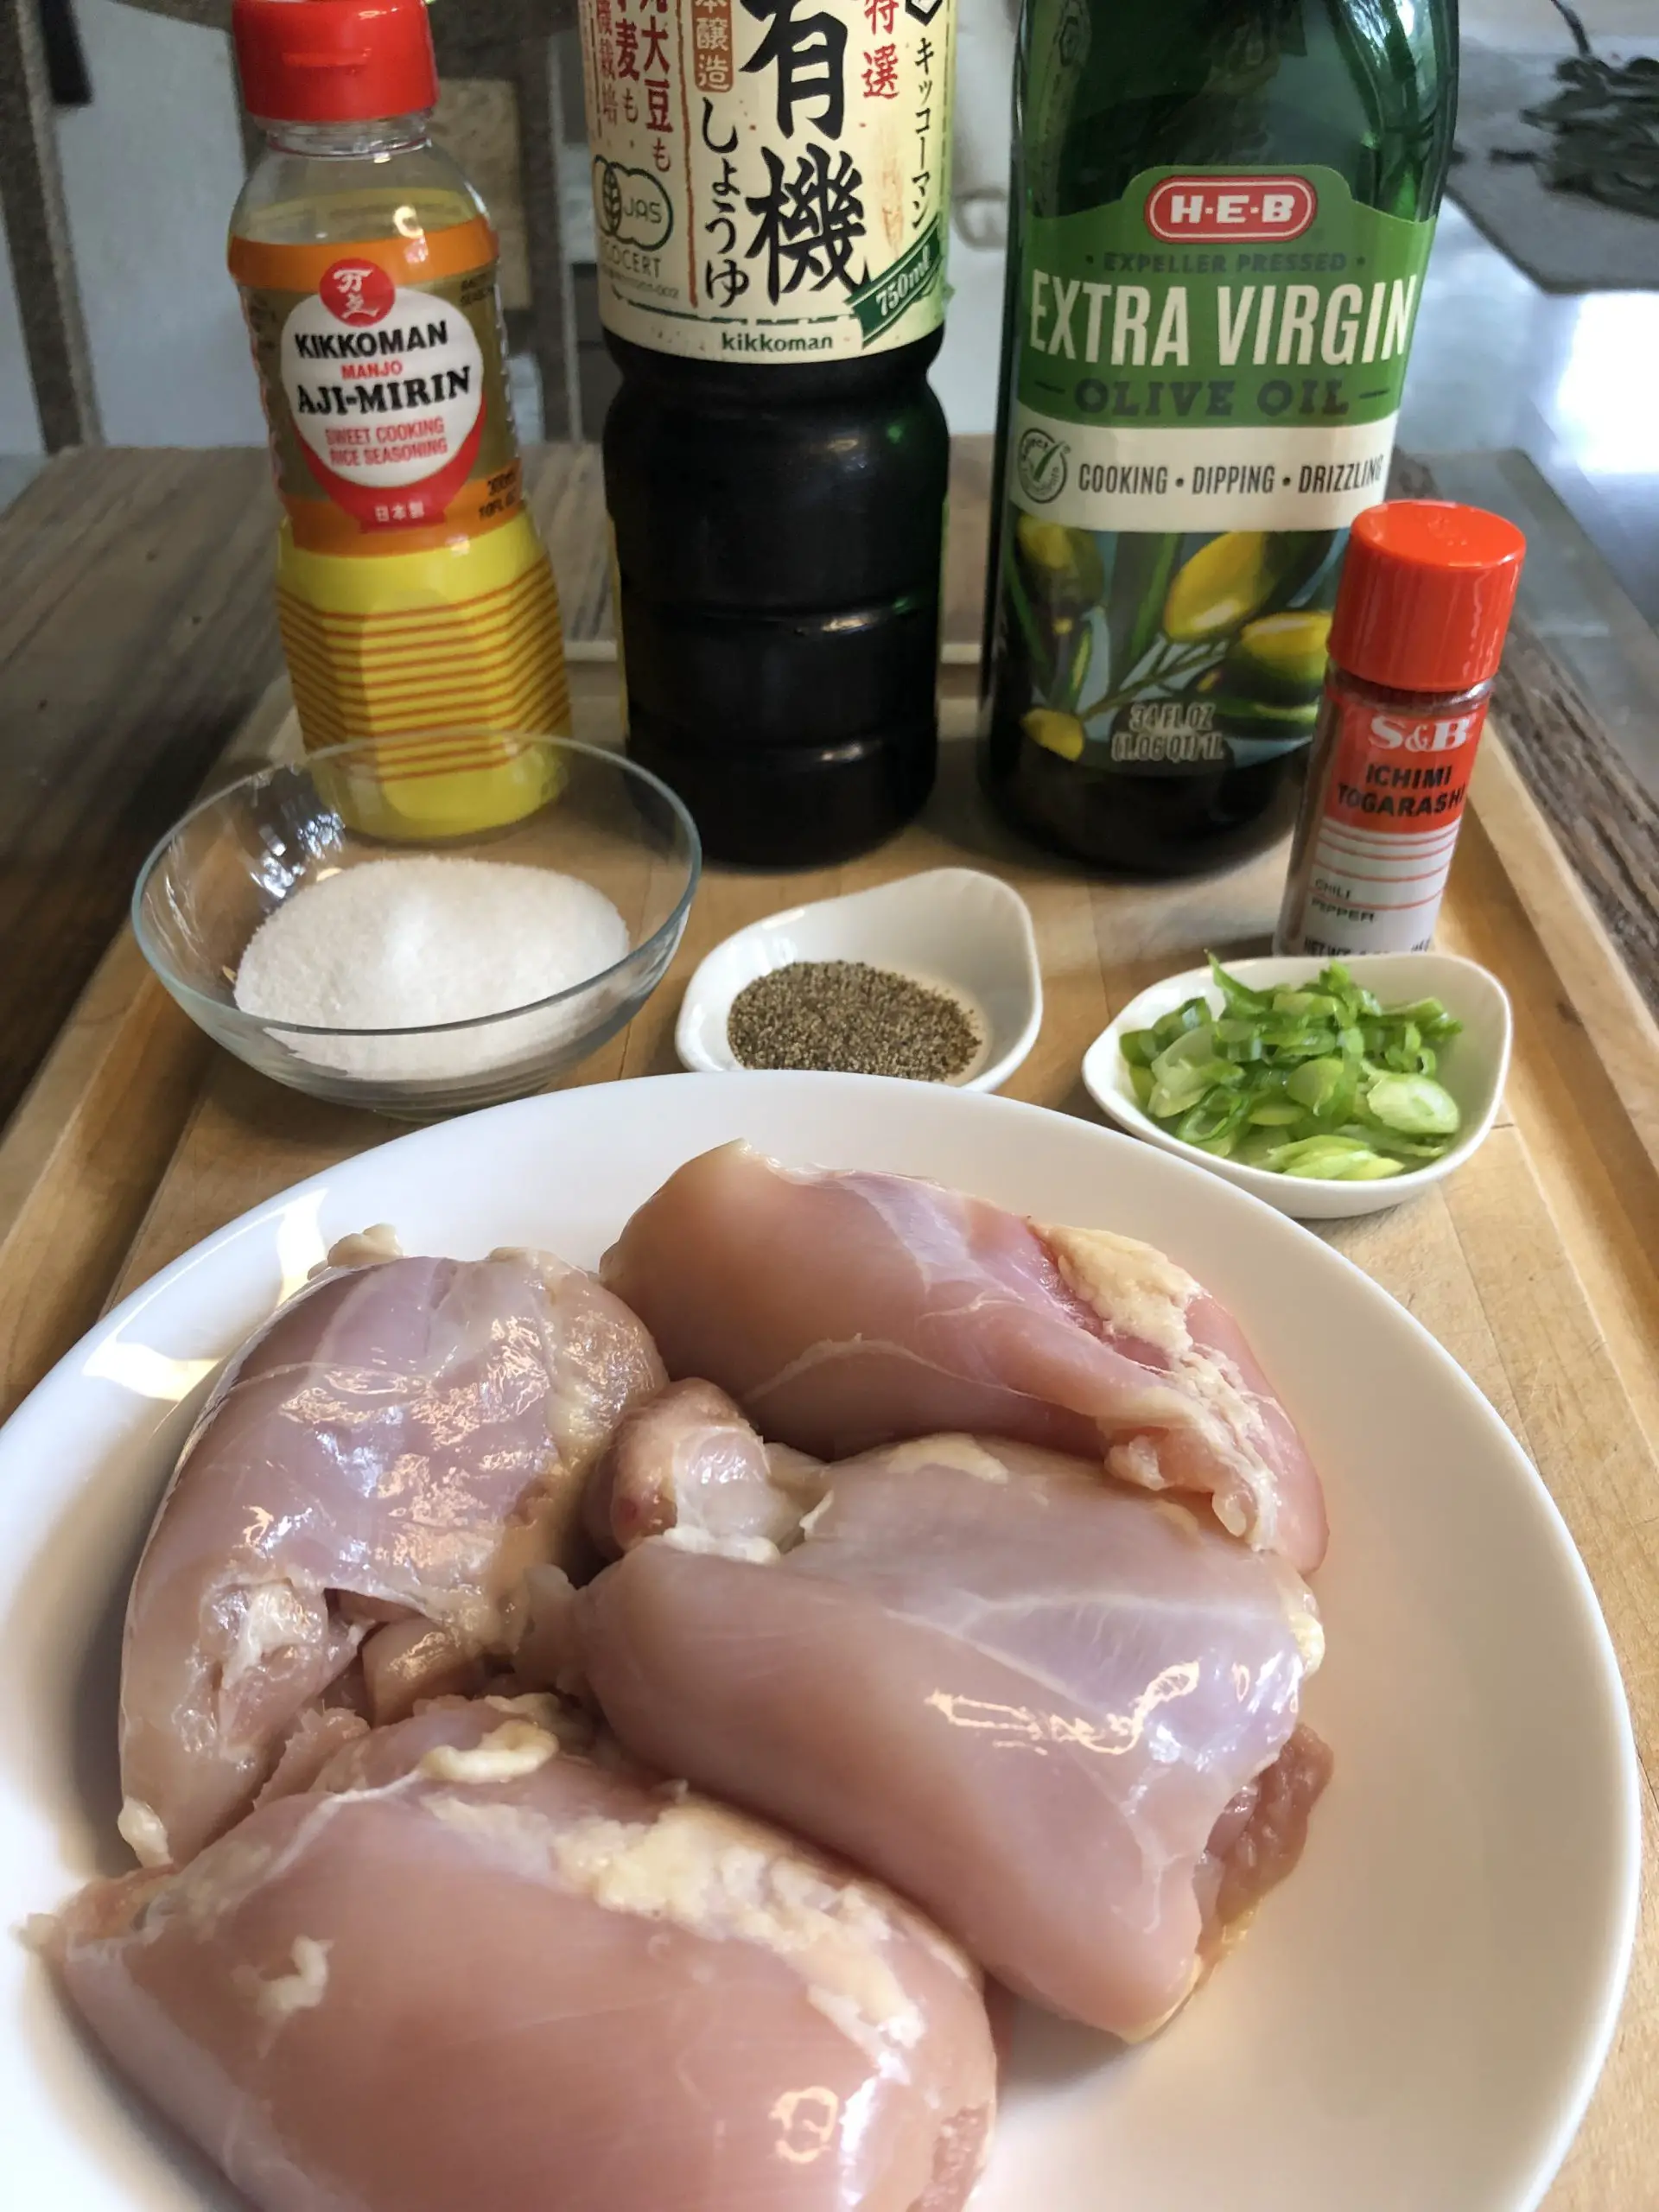 Chicken thighs in a white bowl, Aji-Mirin bottle, bottle of soy sauce, olive oil bottle, sugar in a glass container, pepper in a small dish, green onions in a white dish, Ichimi Togarashi.